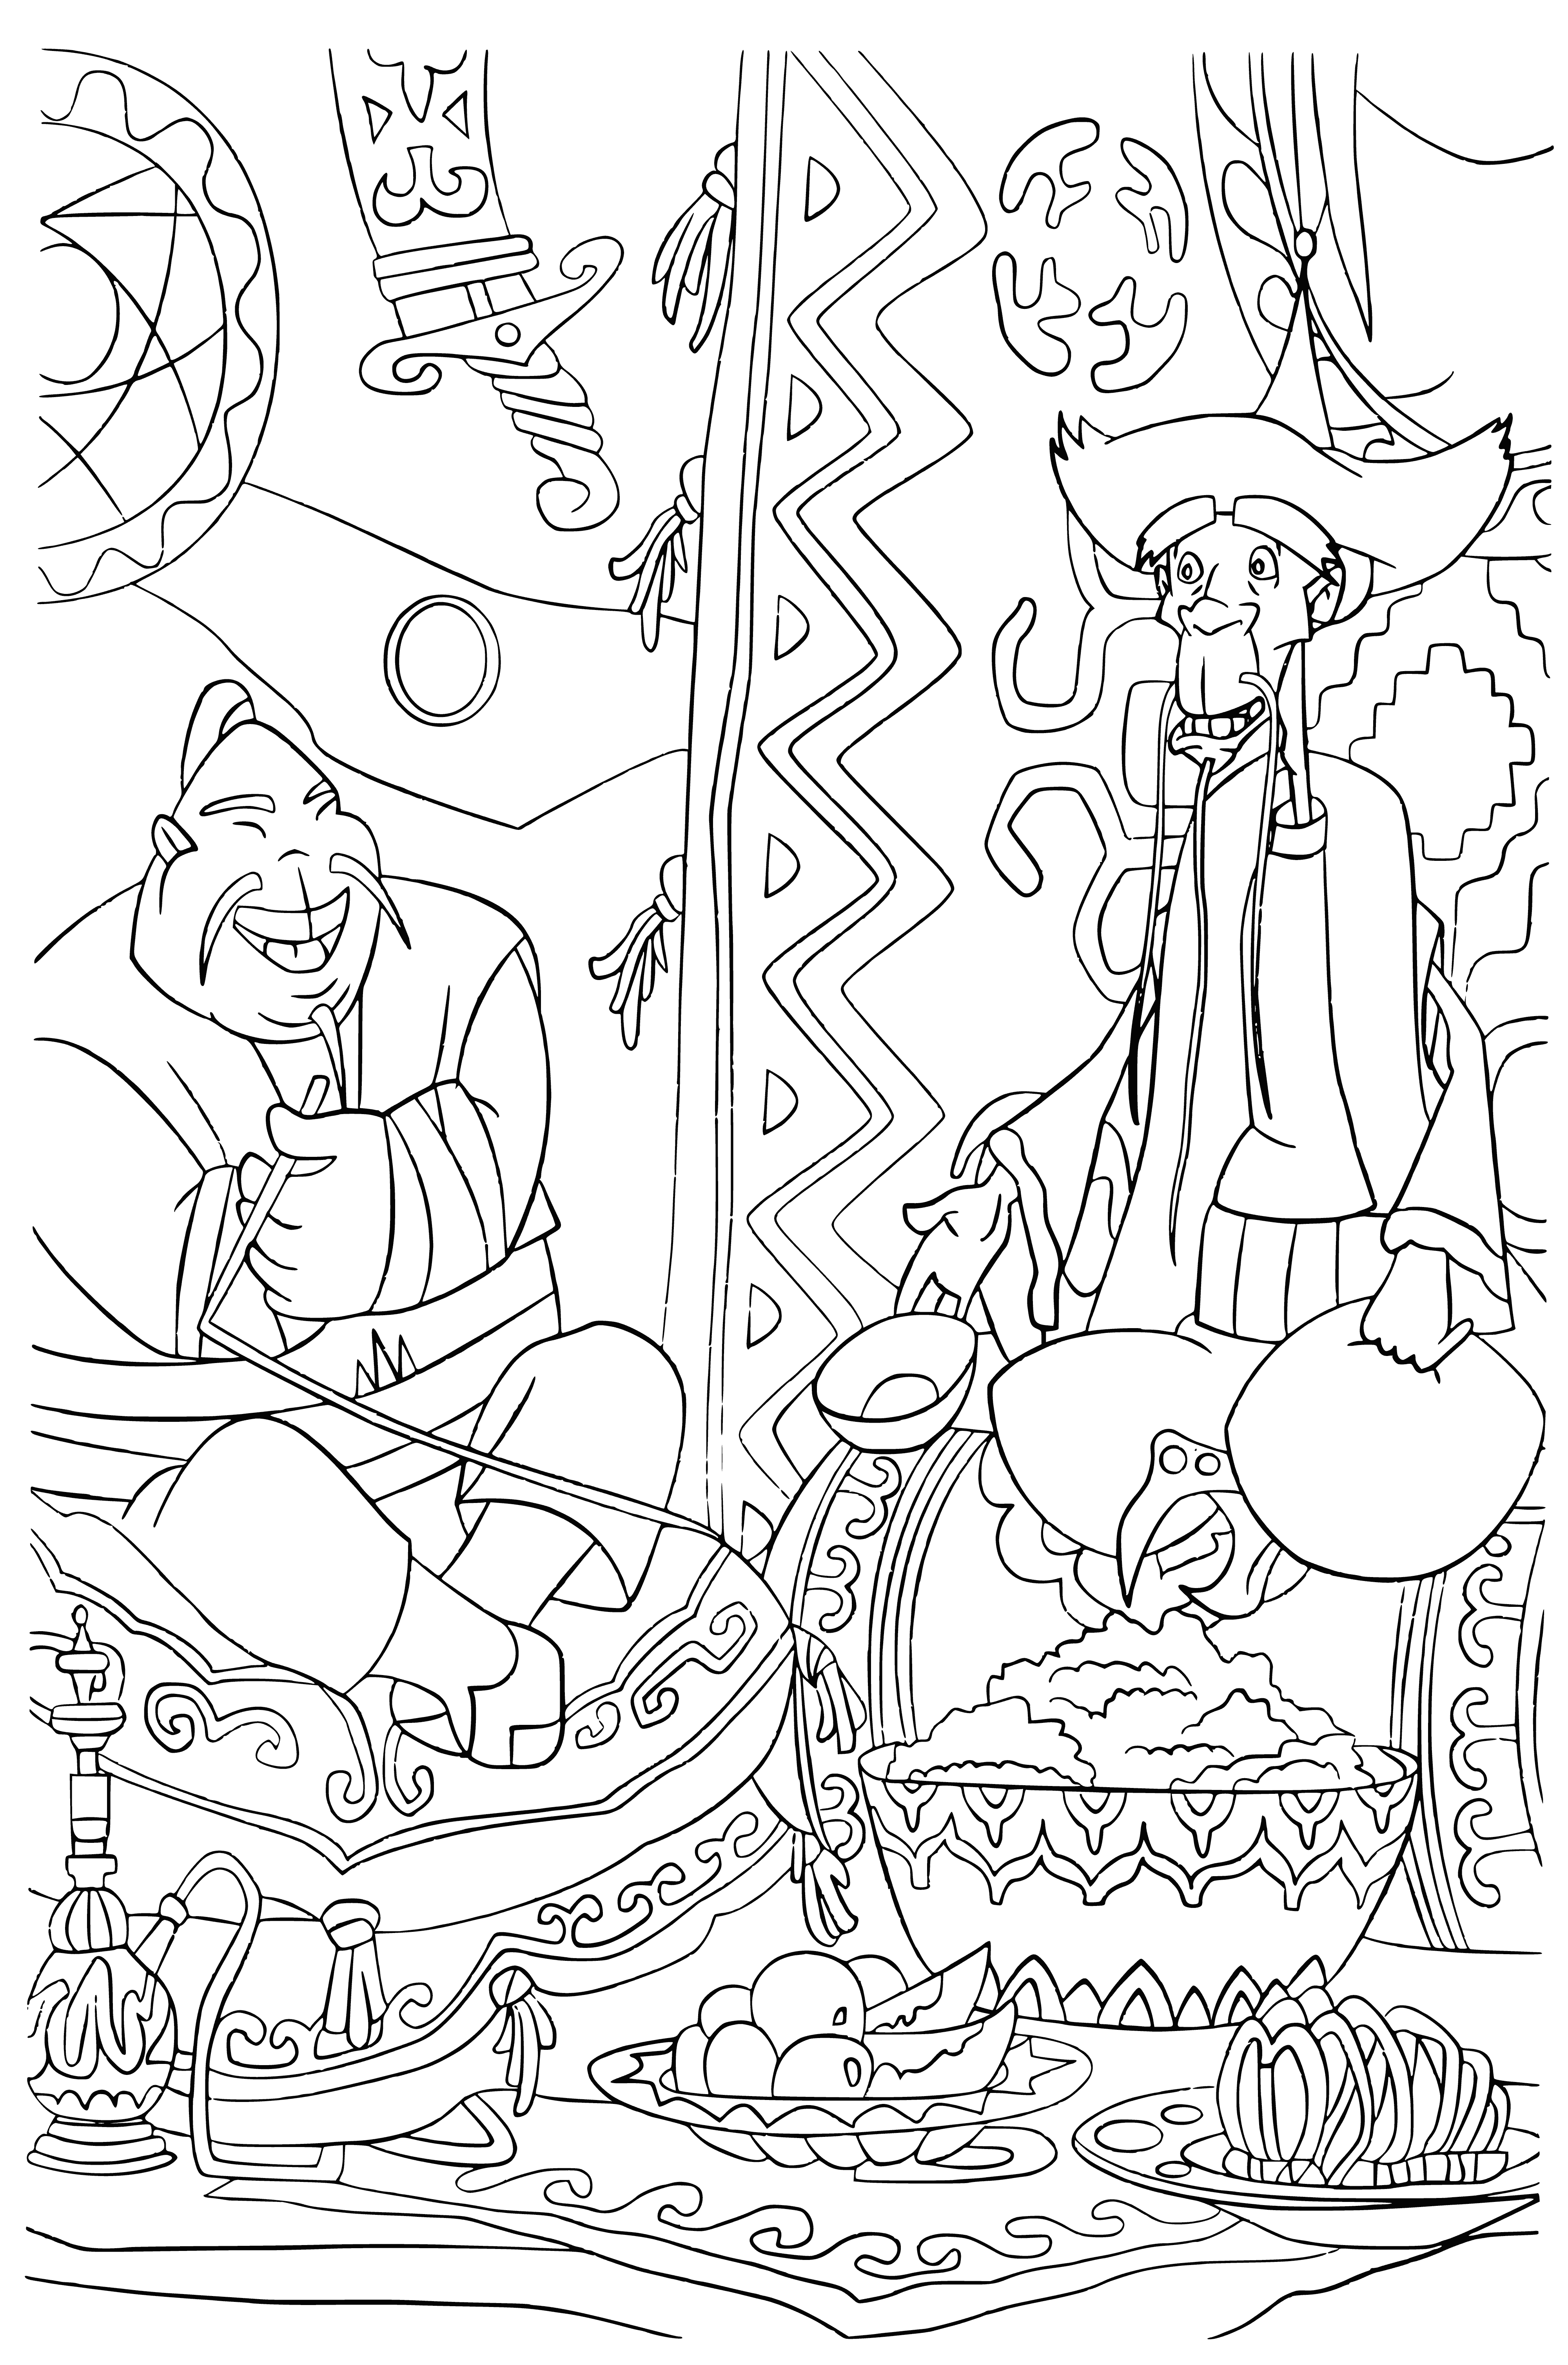 coloring page: Man in armor charges giant snake on horse, wielding spear & shield. Horse rearing, man determined. #epicbattle